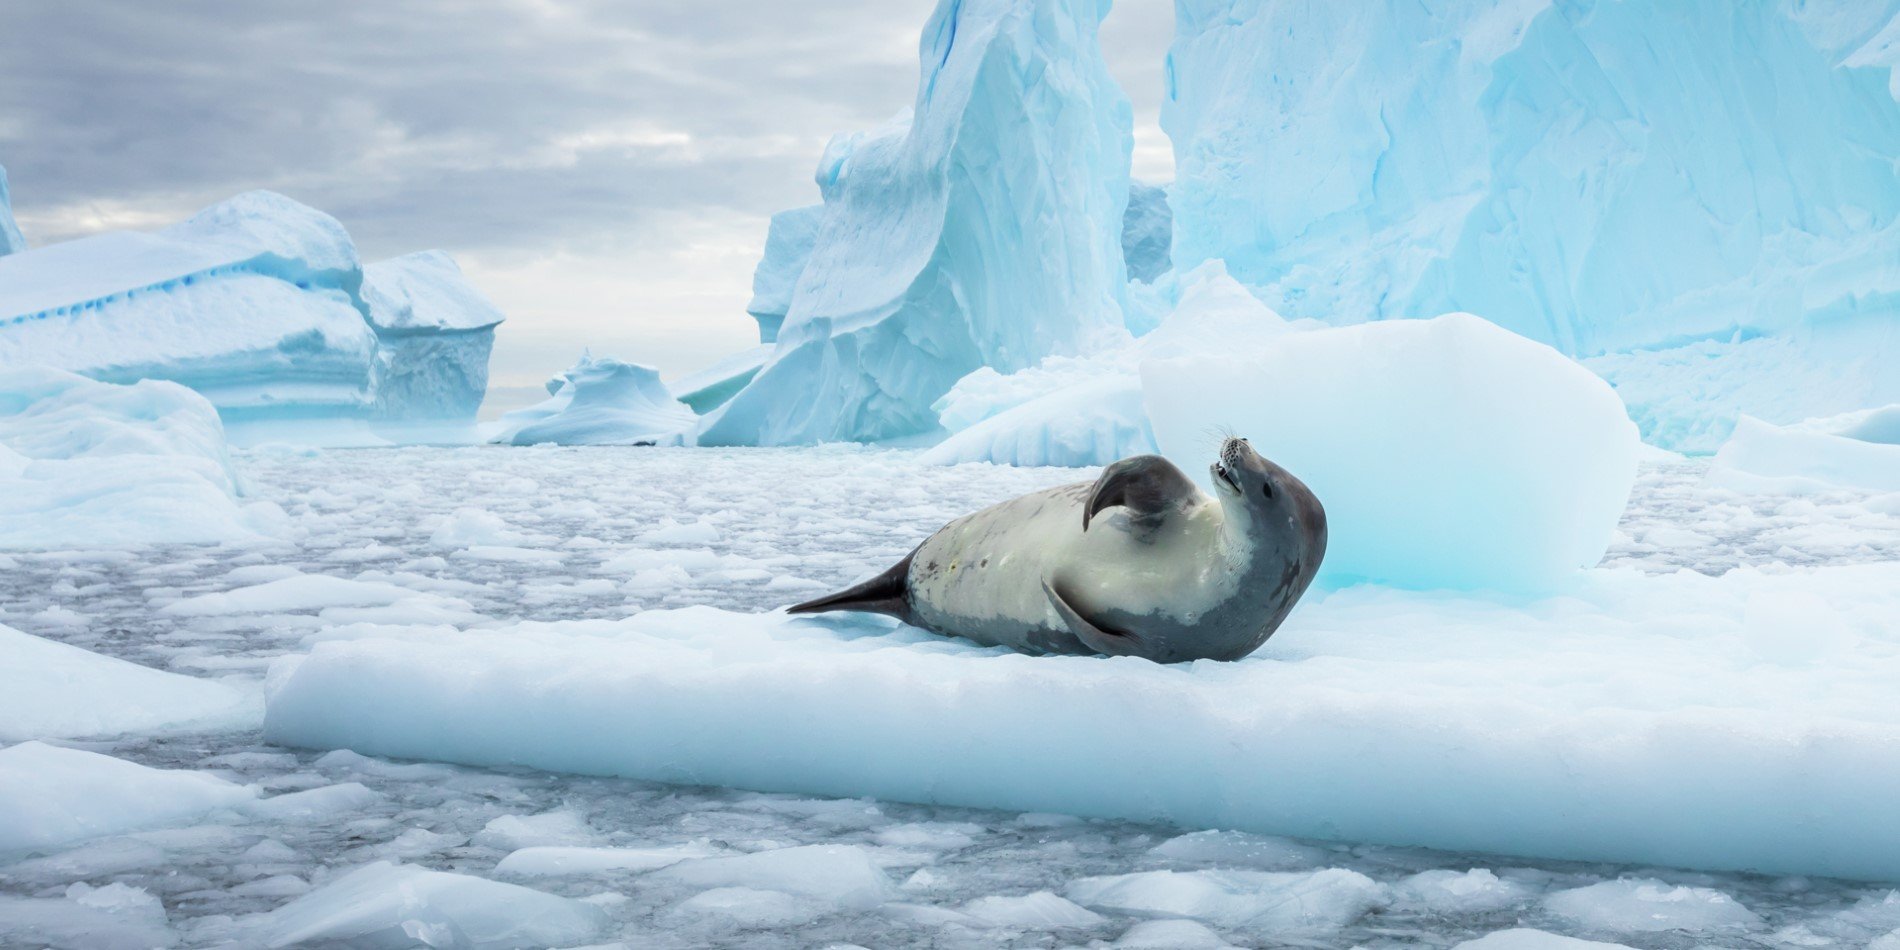 Lion seal lounging on ice, Antarctica